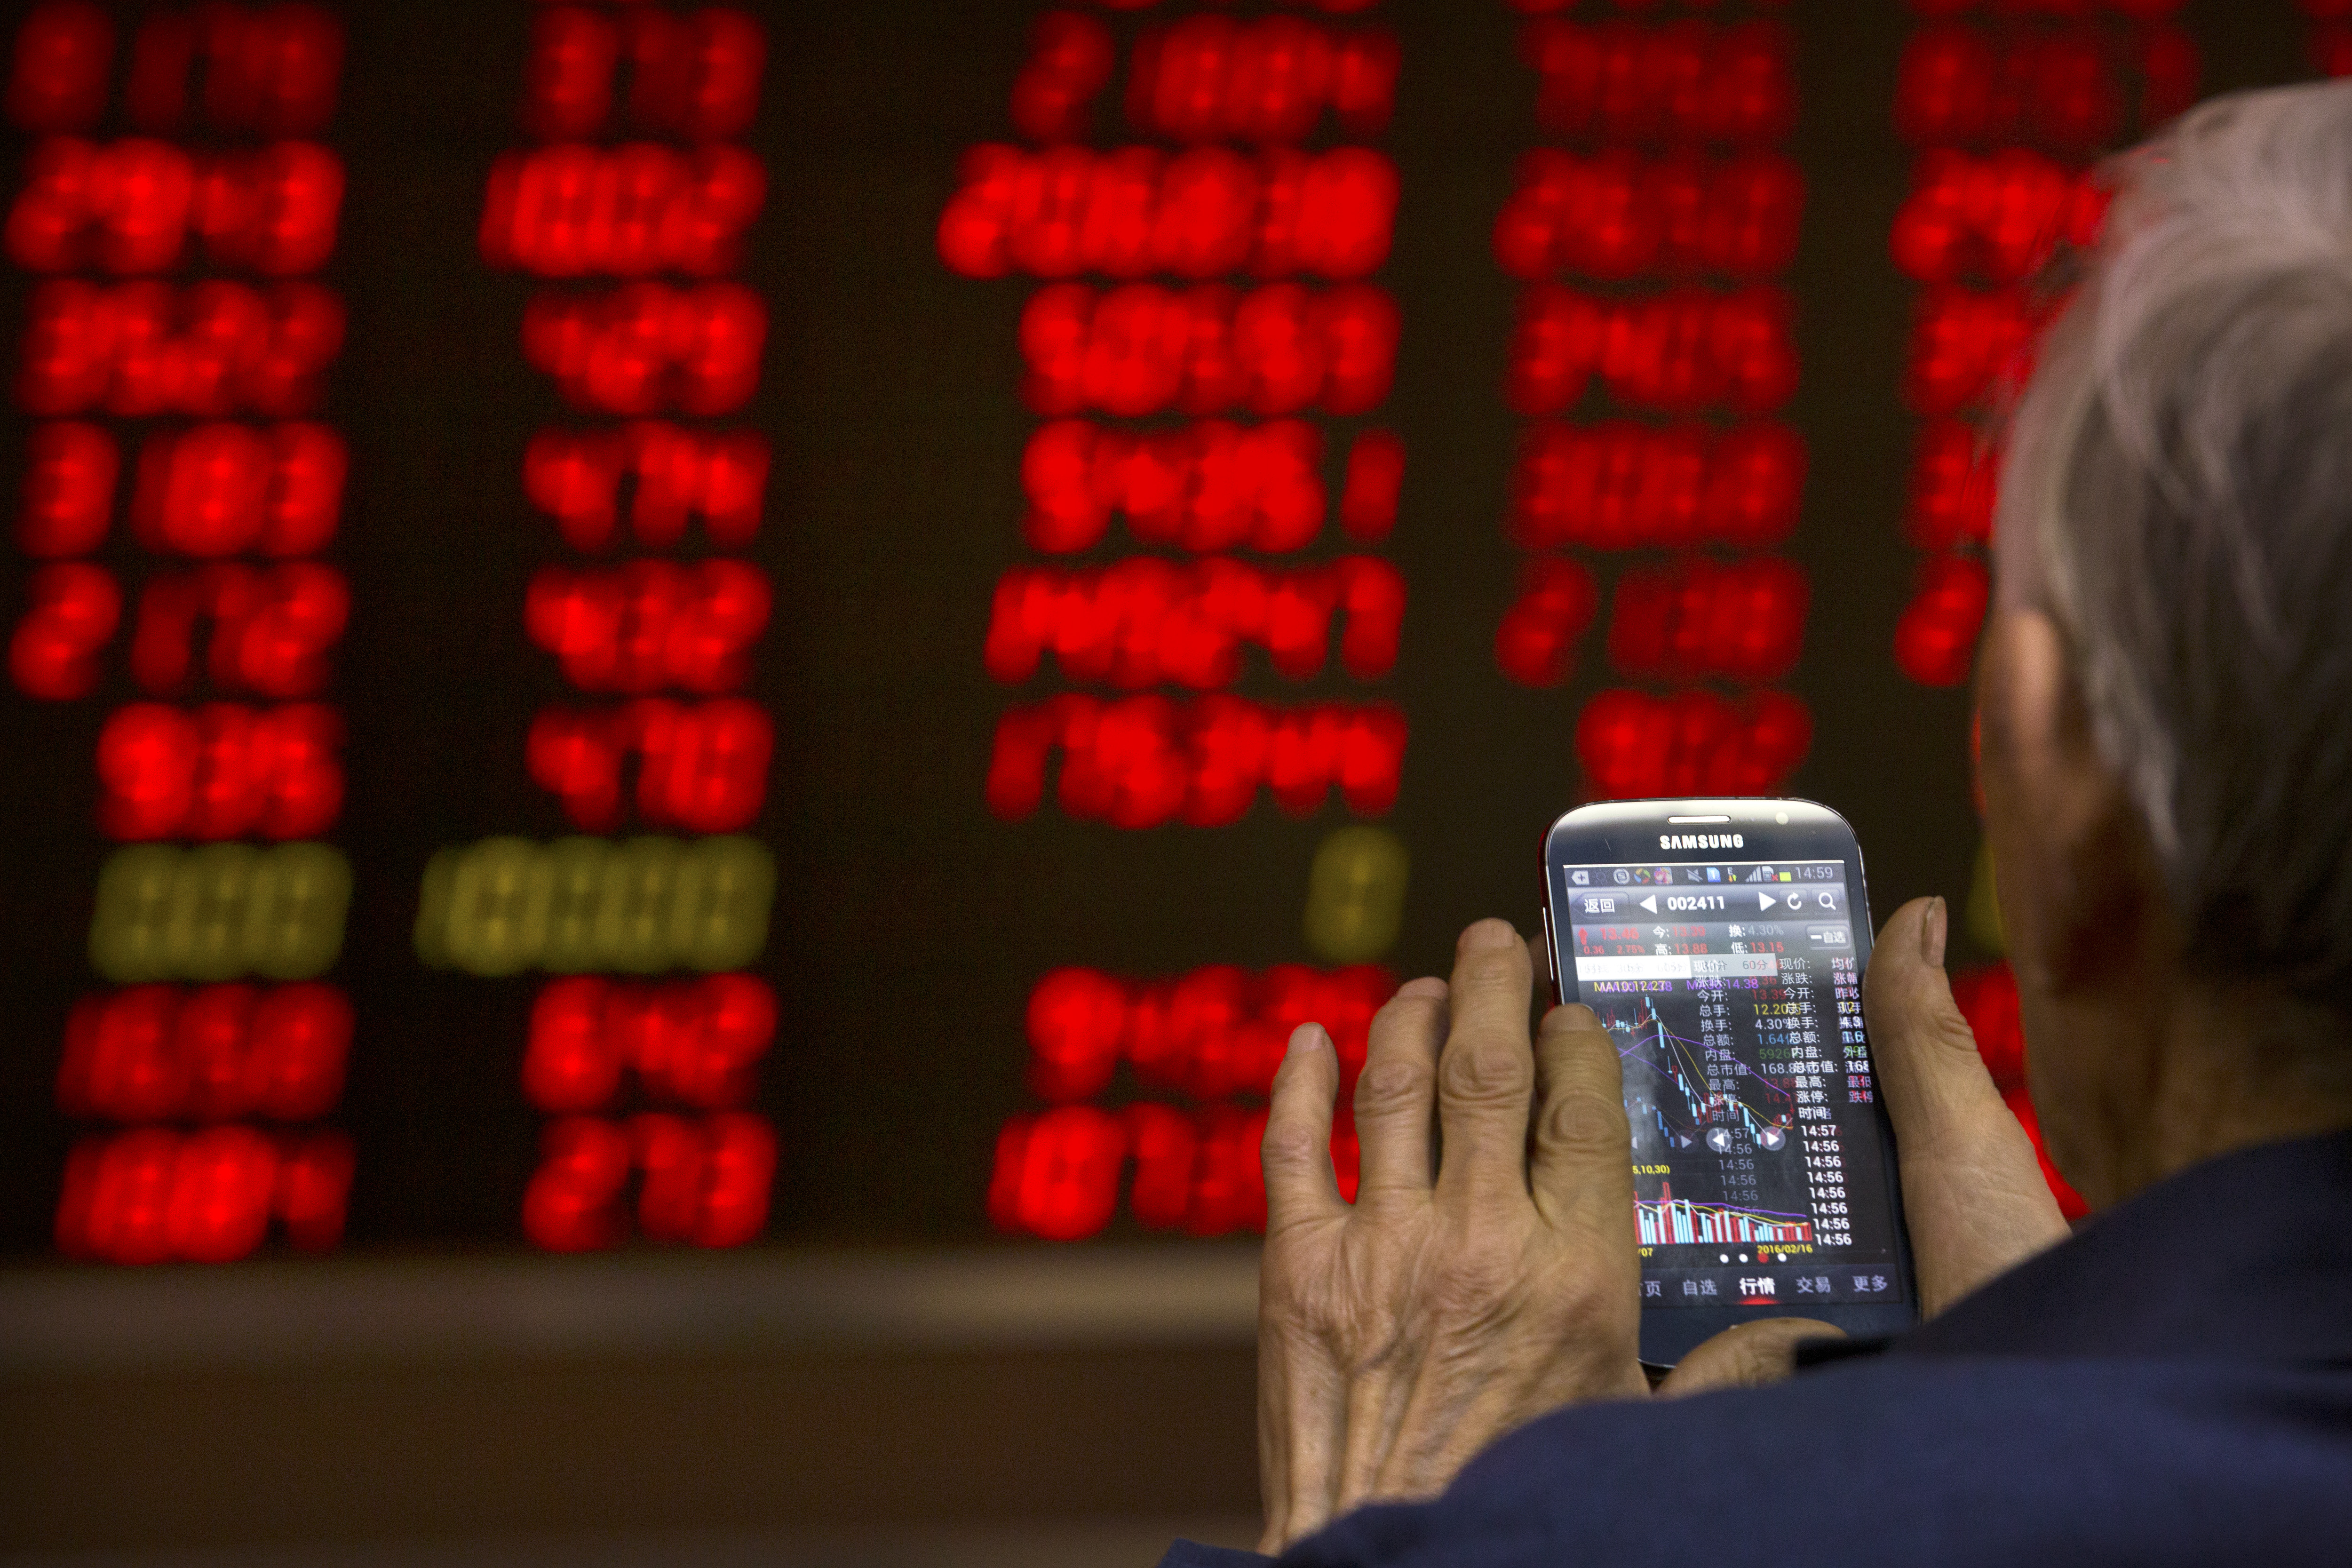 A Chinese investor in Beijing checks stock prices on his phone. Photo: AP